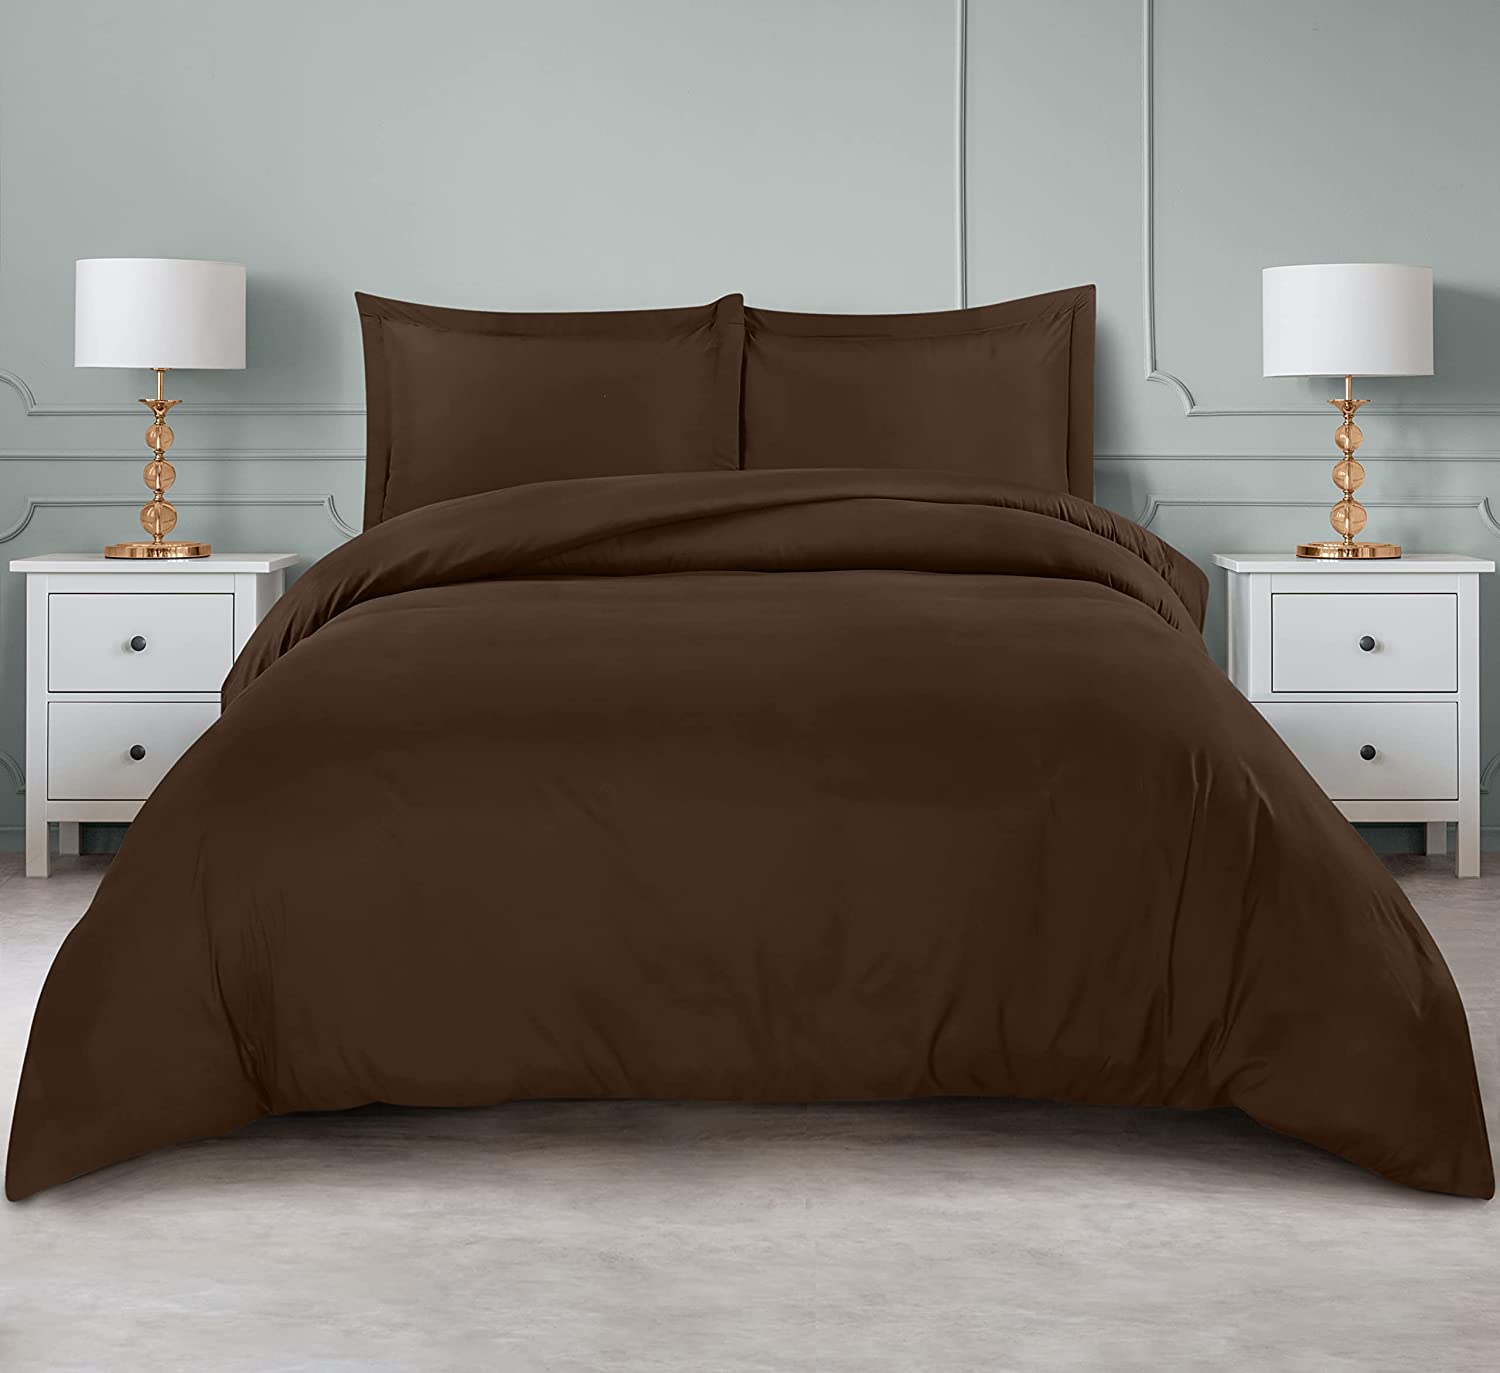 Duvet Cover King Size Set - 1 Duvet Cover with 2 Pillow Shams - 3 Pieces Comforter Cover with Zipper Closure - Ultra Soft Brushed - Brown